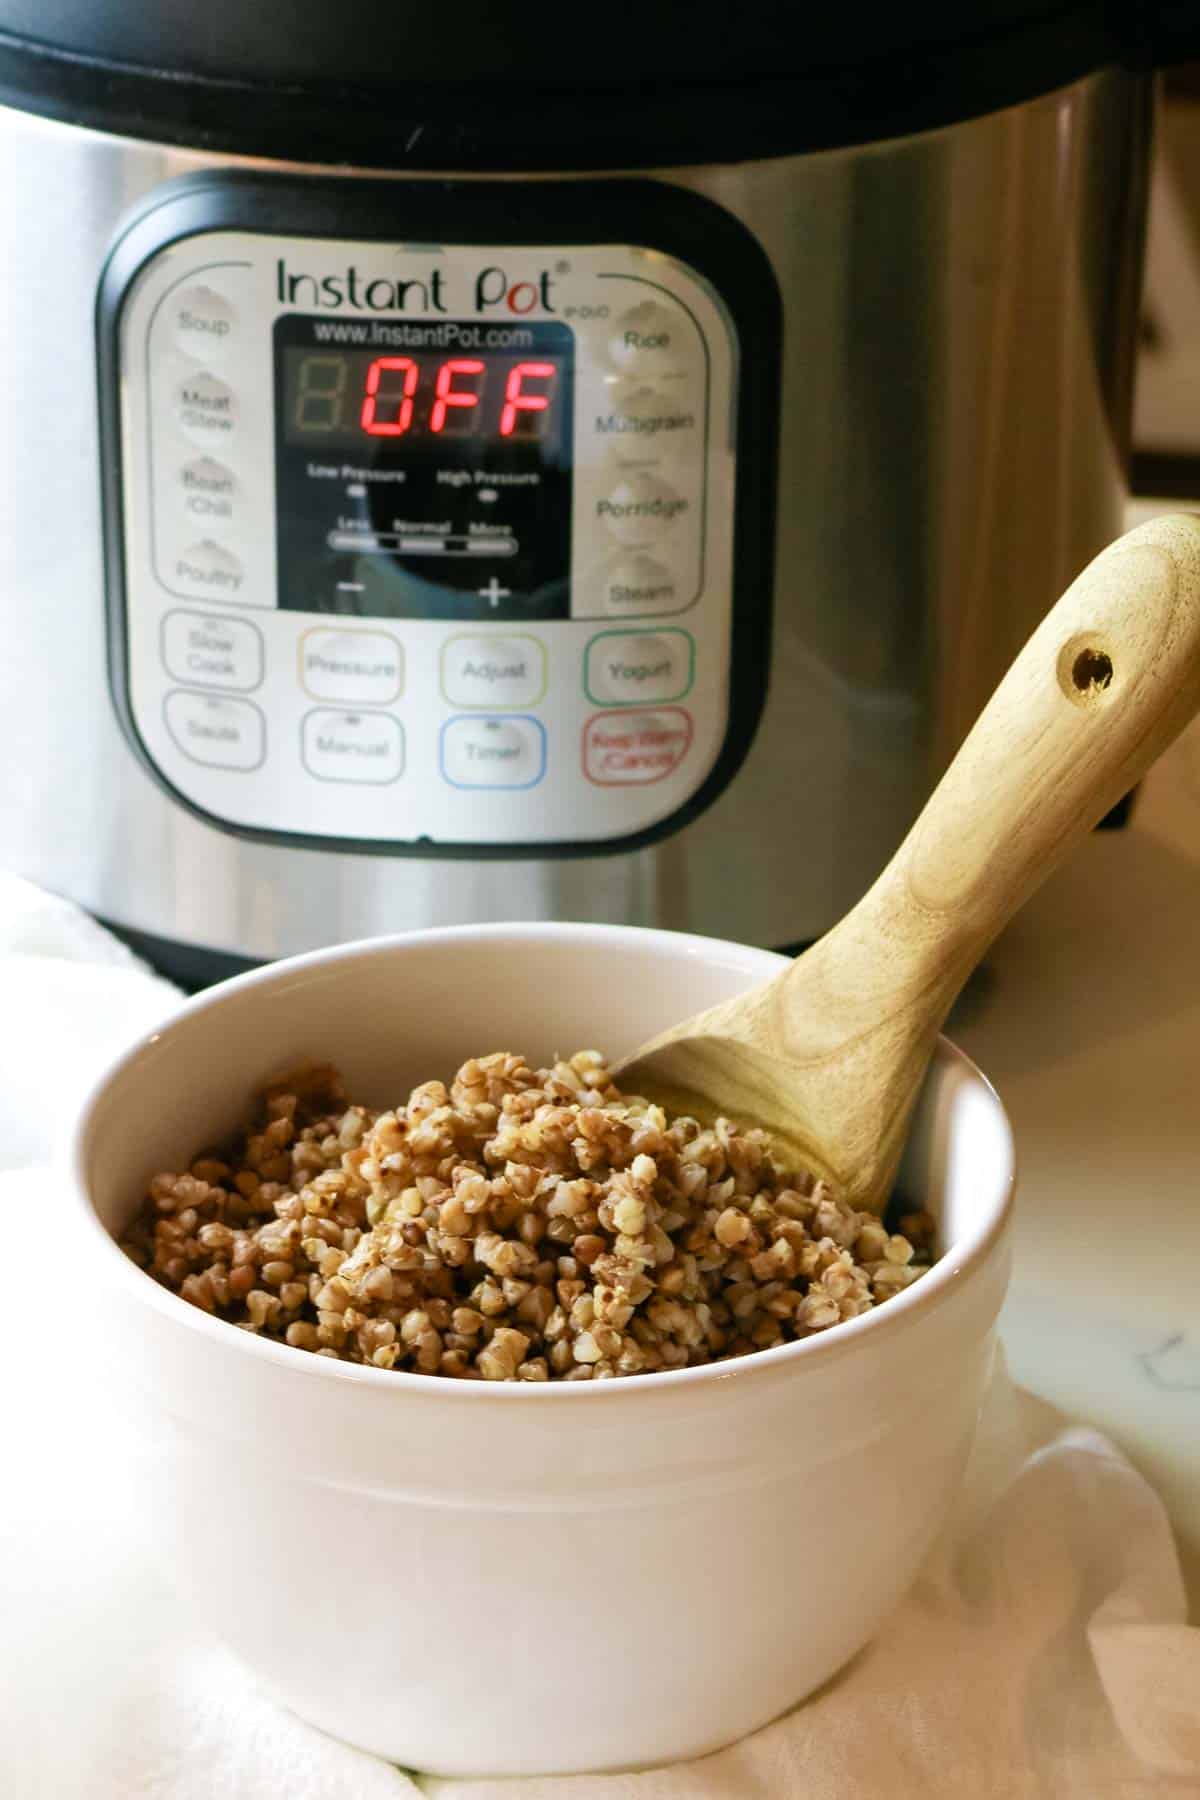 Buckwheat in white bowl with wooden spoon and Instant Pot in background